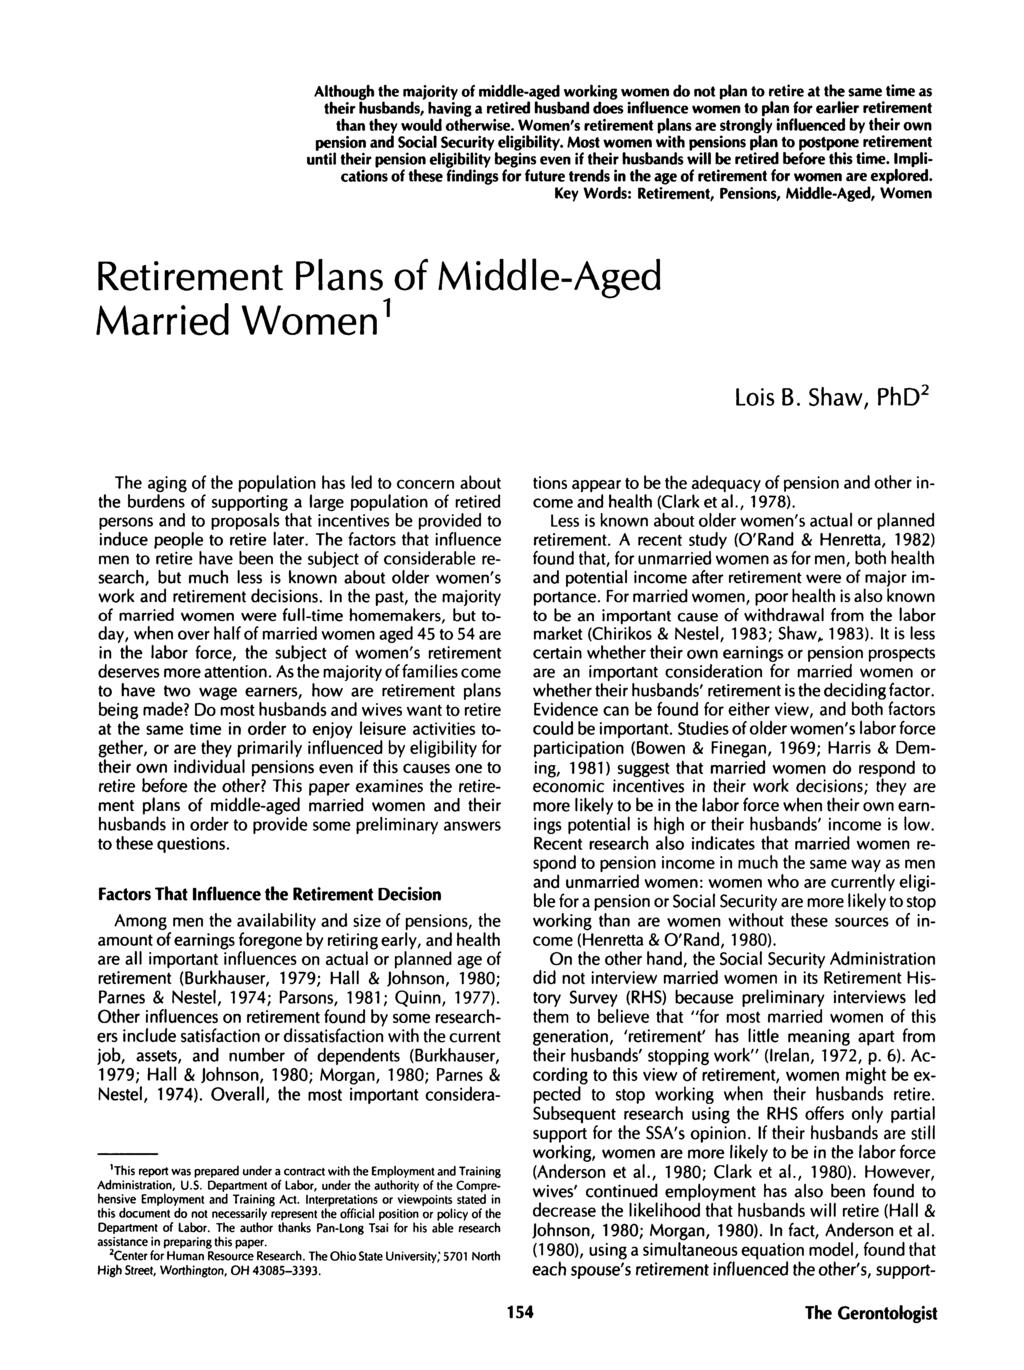 Although the majority of middle-aged working women do not plan to retire at the same time as their husbands, having a retired husband does influence women to plan for earlier retirement than they